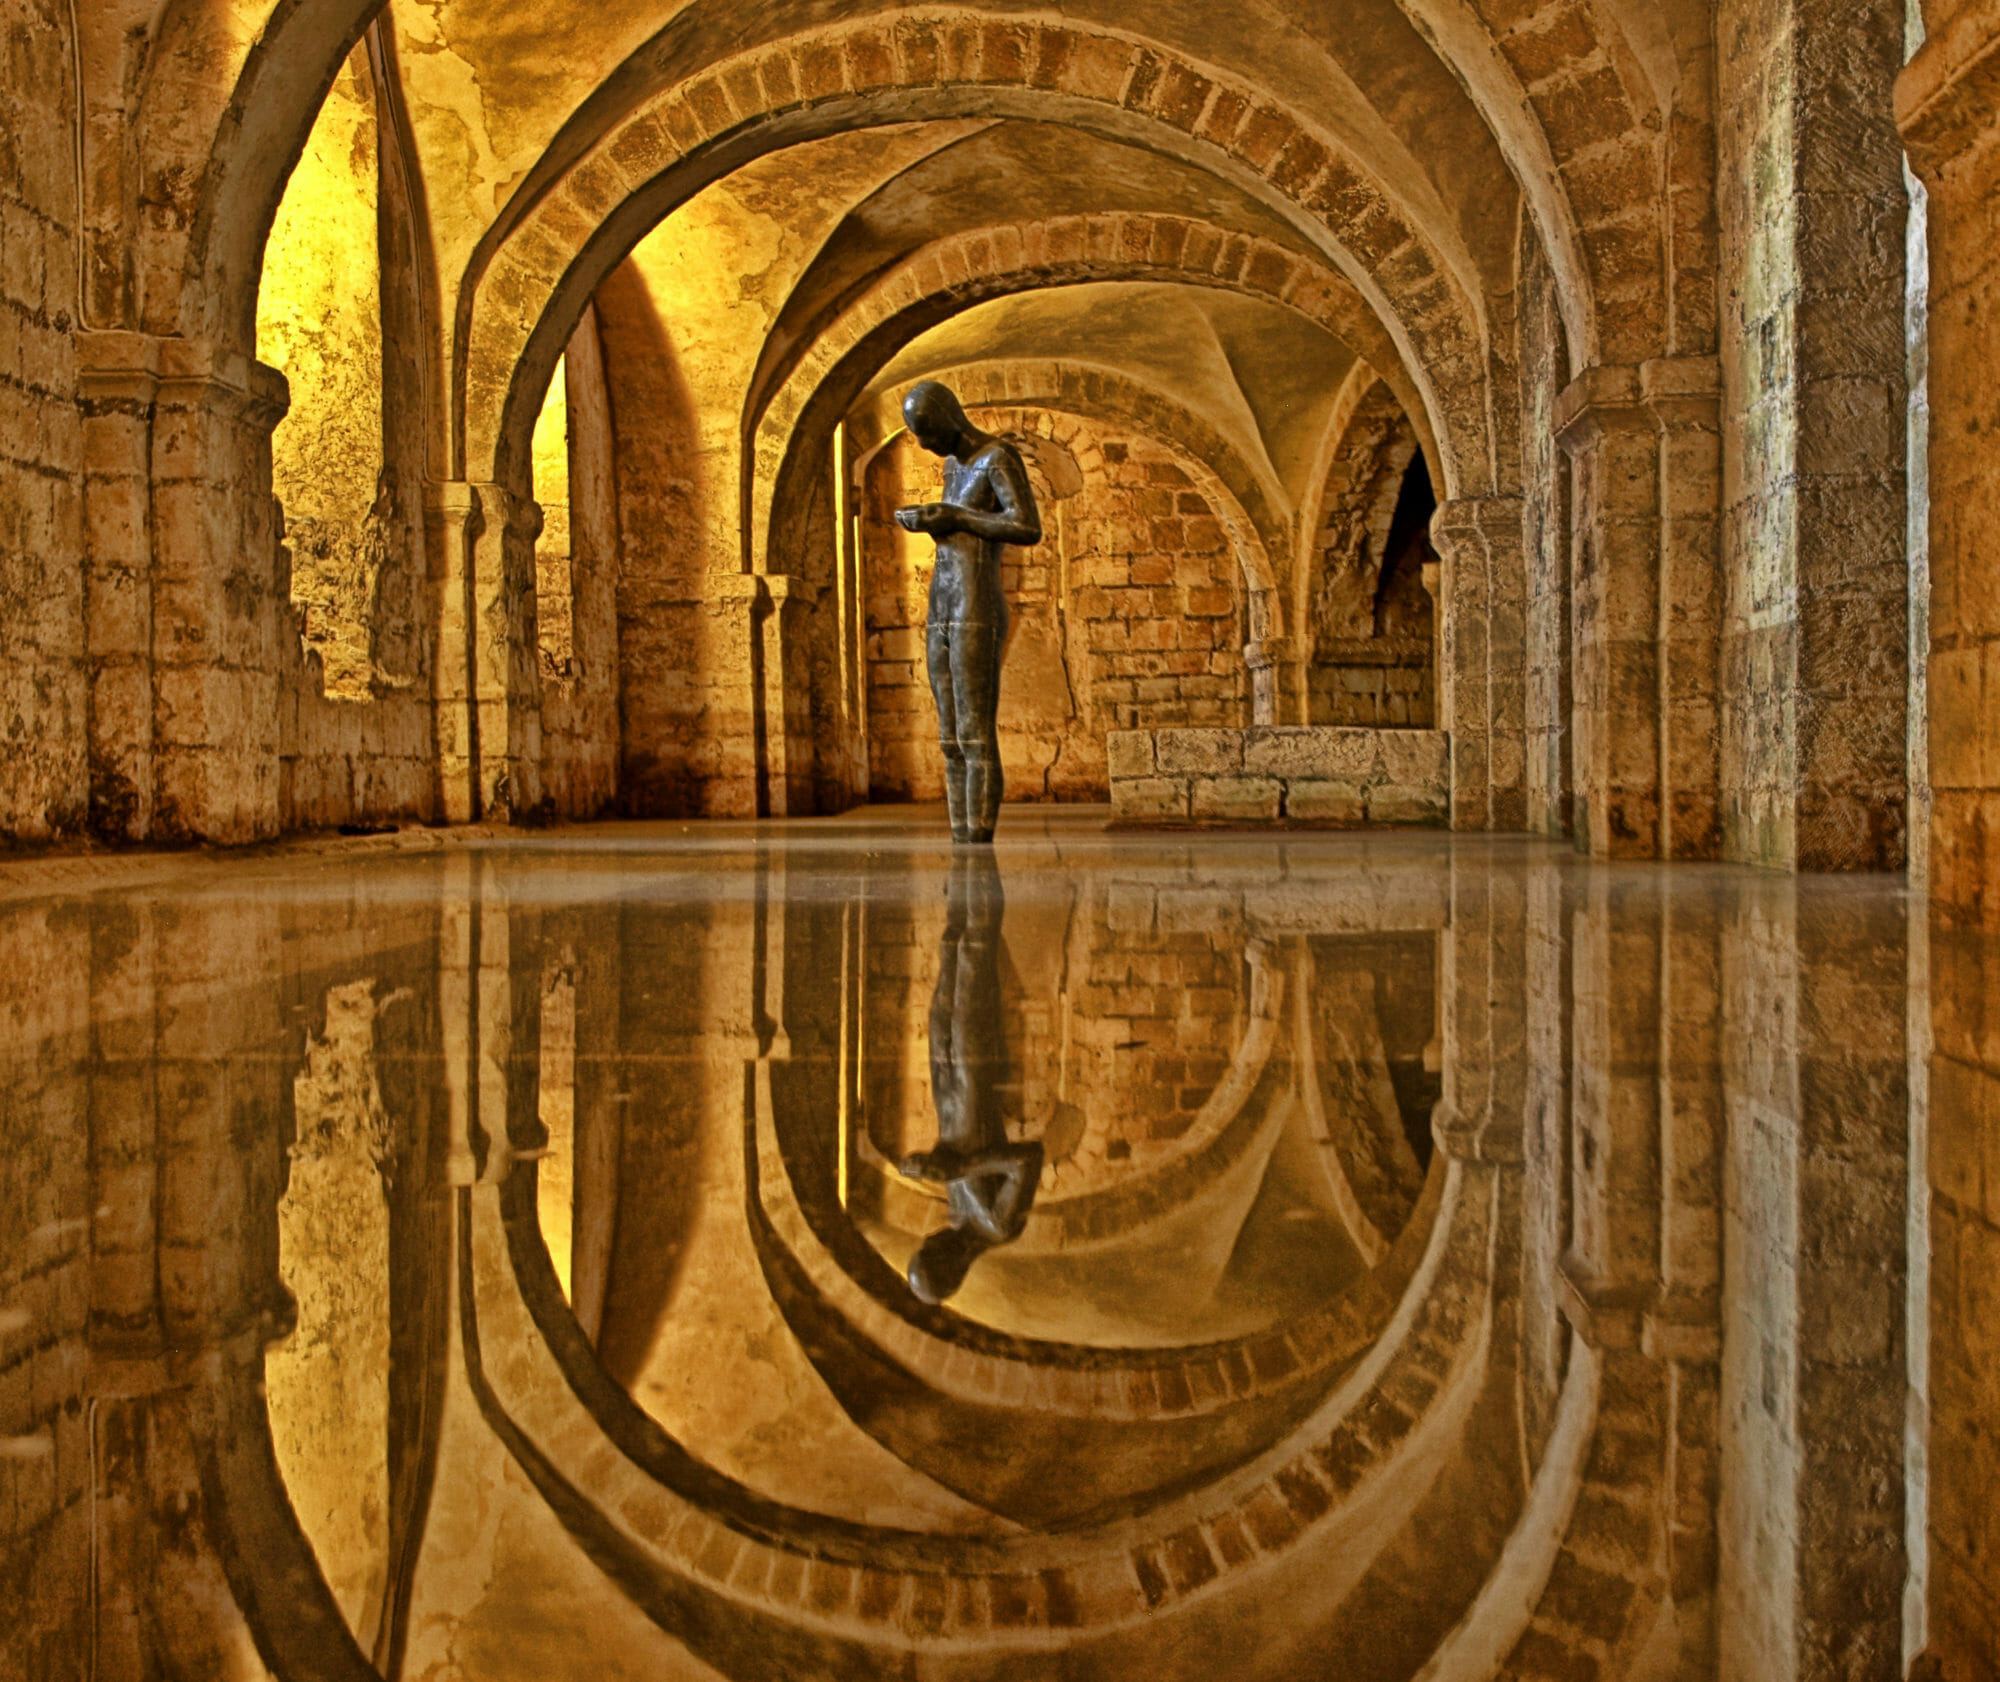 Antony Gormley, Sound II, 1986. Sculpture, metal statue standing in flooded crypt, Winchester Cathedral, England, UK.